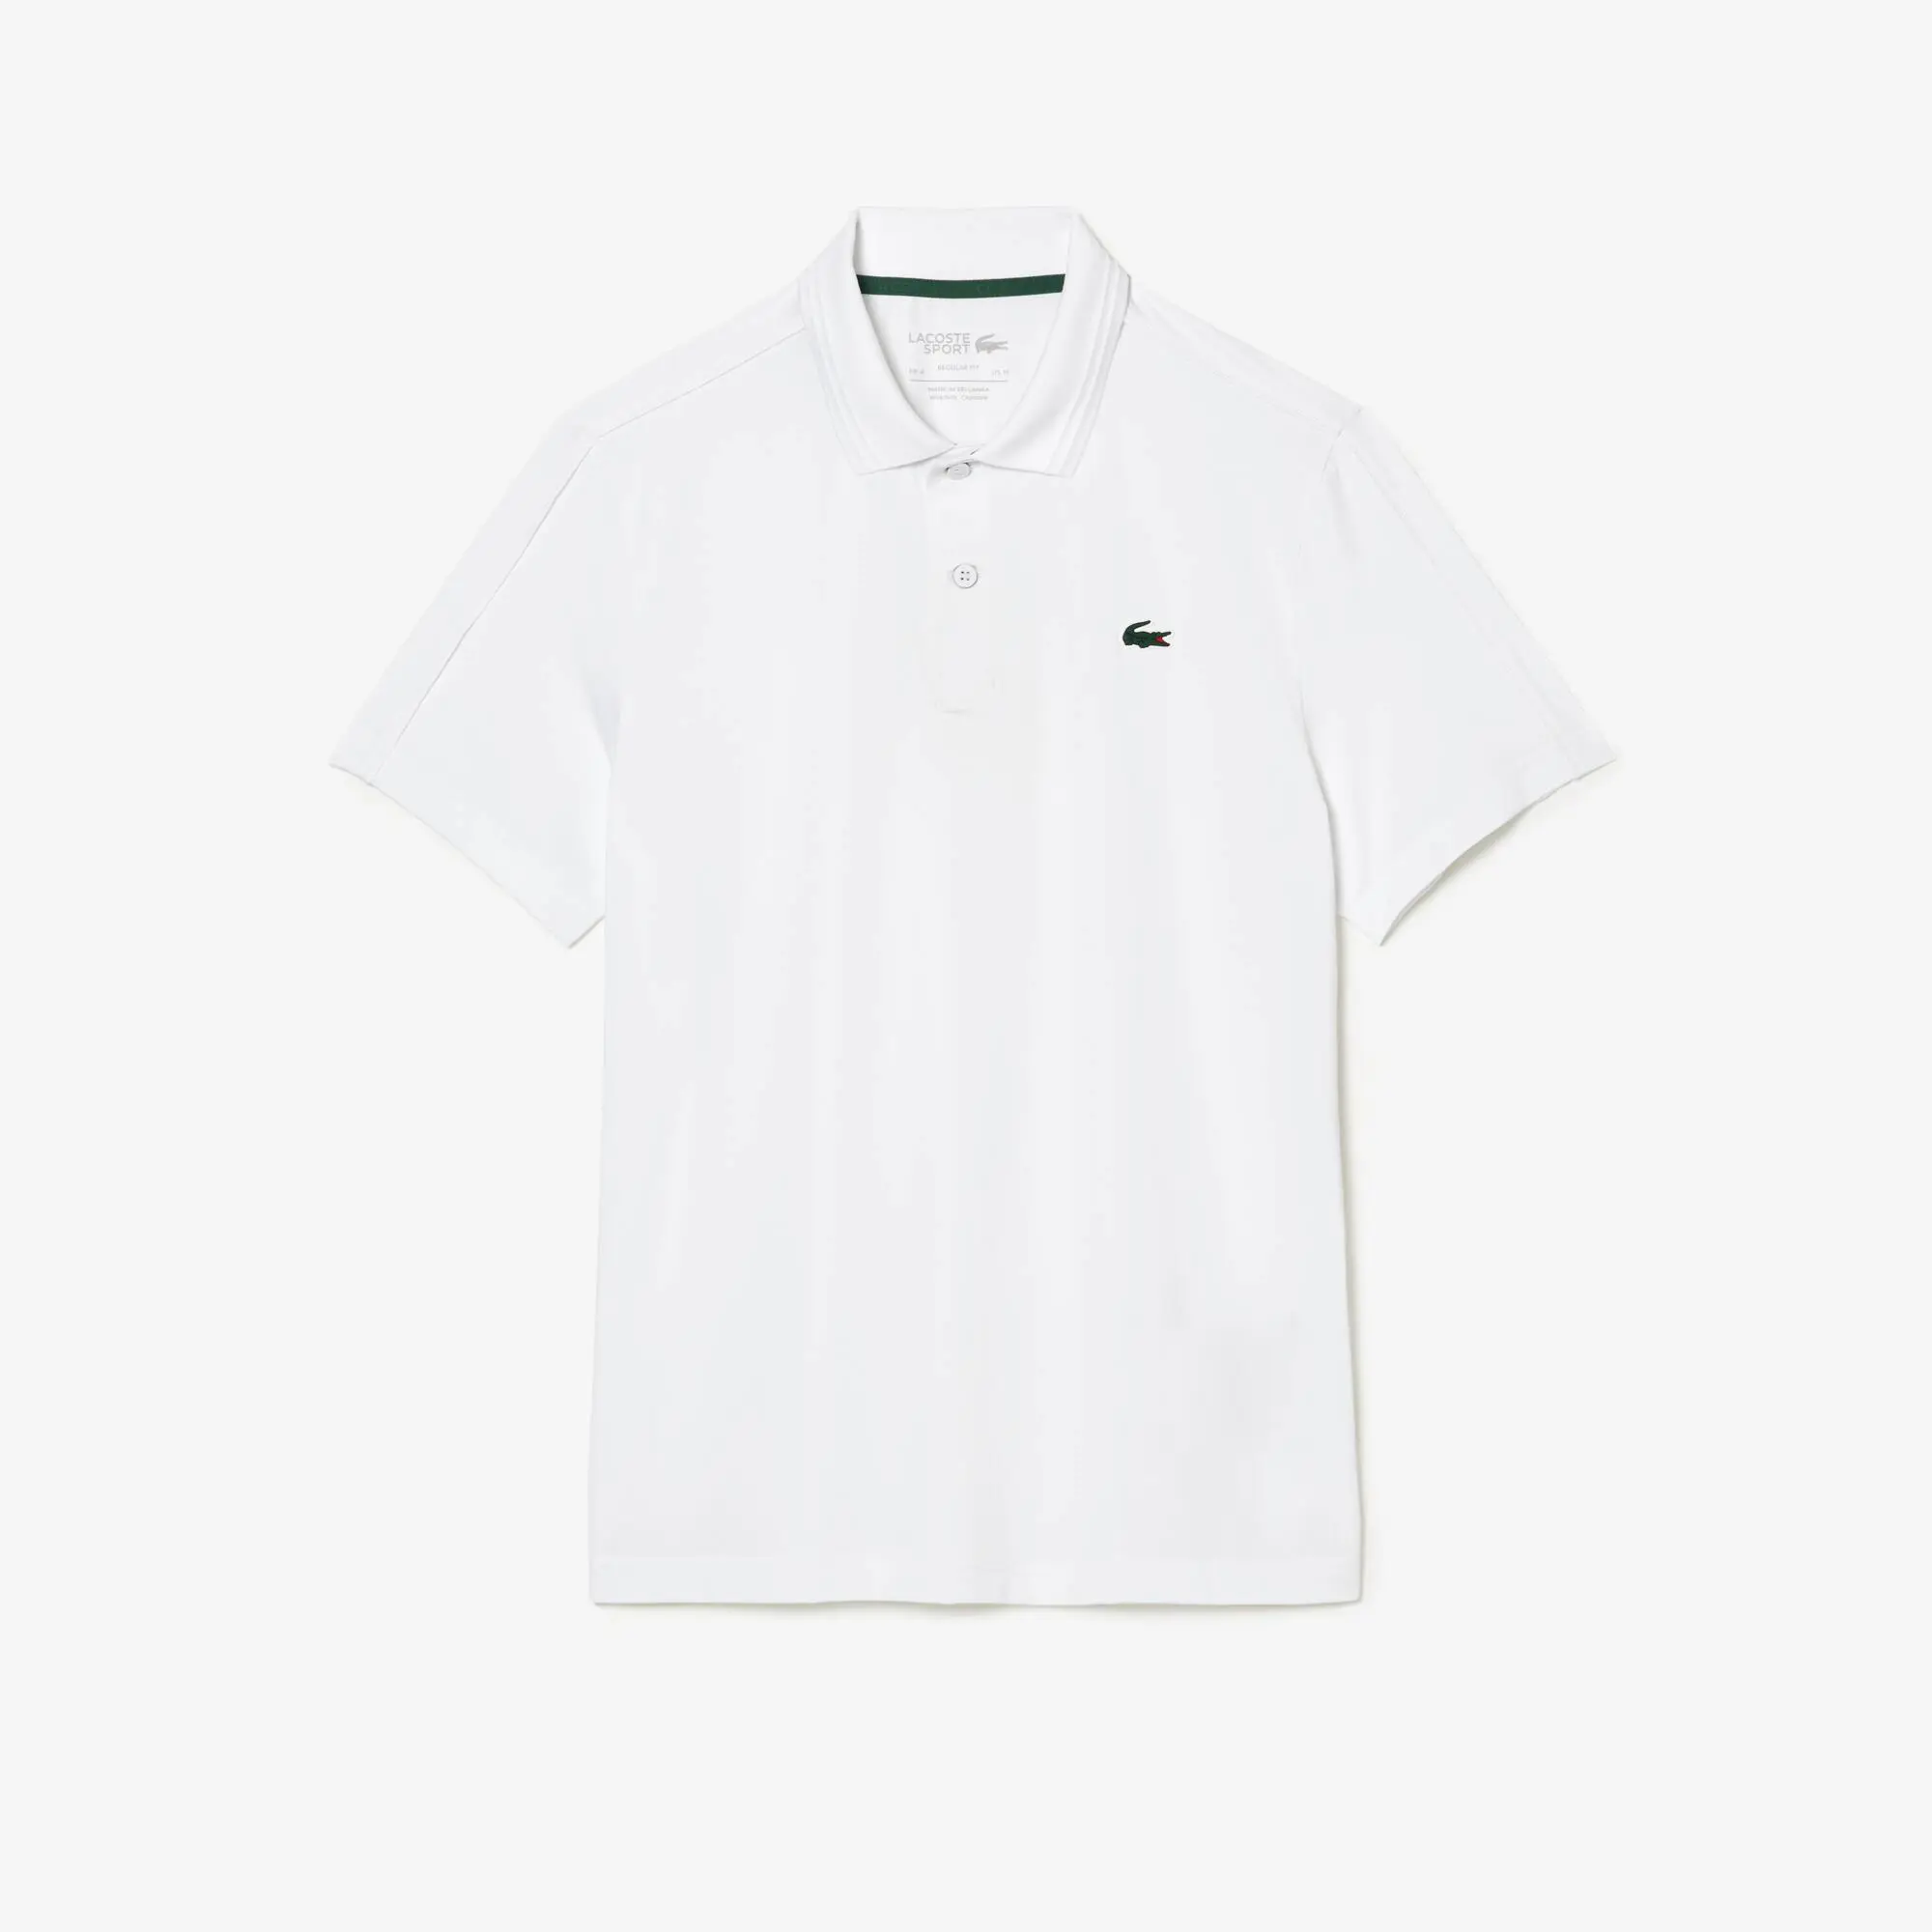 Lacoste Regular Fit Tennis Polo Shirt in Recycled Fiber Jersey. 1